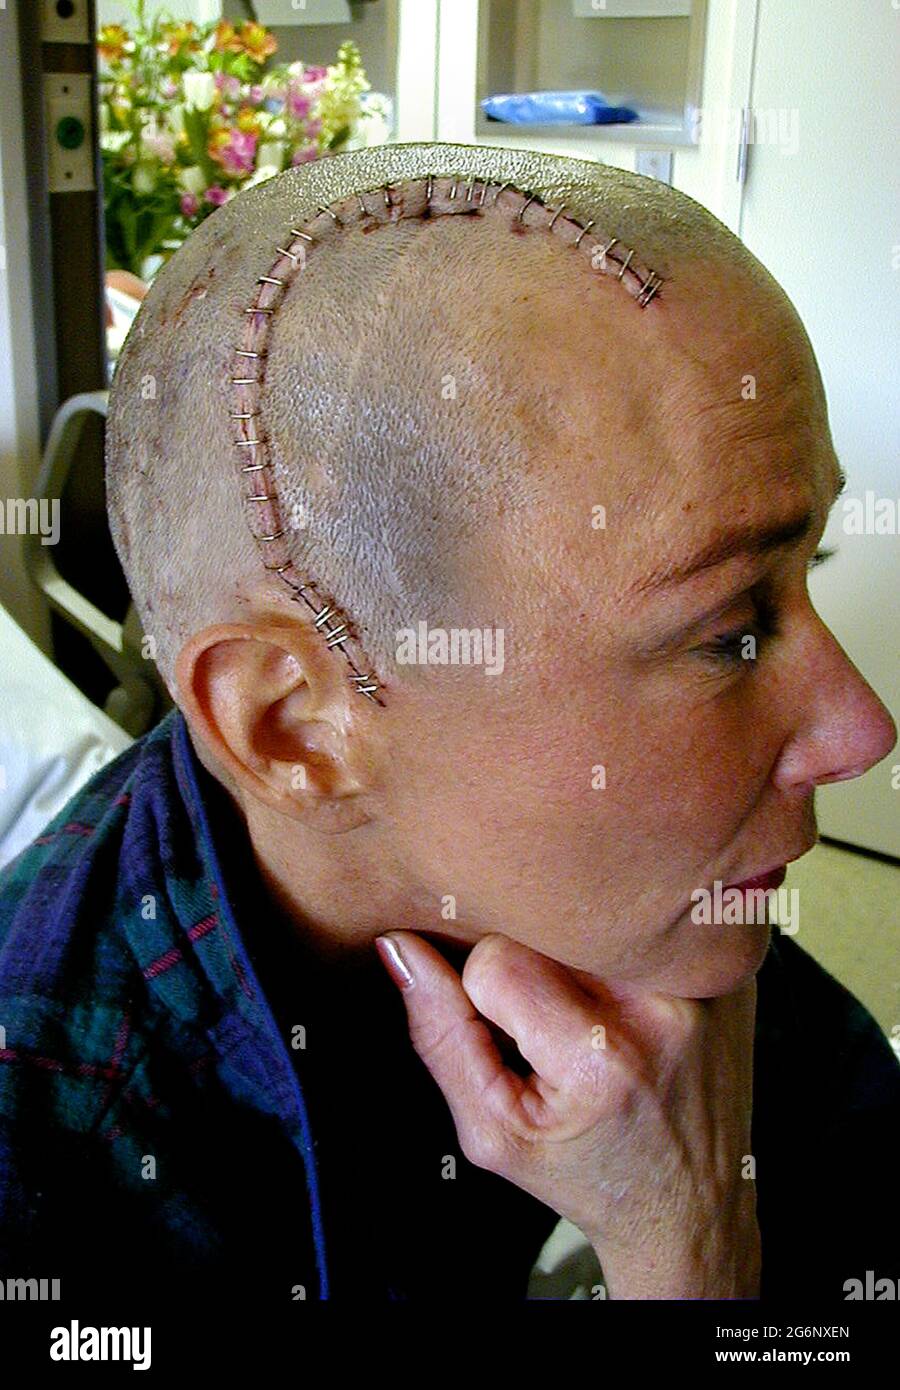 A bald American woman who suffered from epilepsy displays the stainless steel staples that were used to close a large incision in her head after an operation on her brain. Her hair was totally removed before the surgeon cut into her scalp and skull (cranium) to perform a temporal lobectomy, a surgery that can lower the number of seizures, make them less severe, or even stop them from happening. During this medical procedure, the doctor removed some of the temporal lobe of her brain where most seizures start. (4th of 7 related images.) Model released. Stock Photo